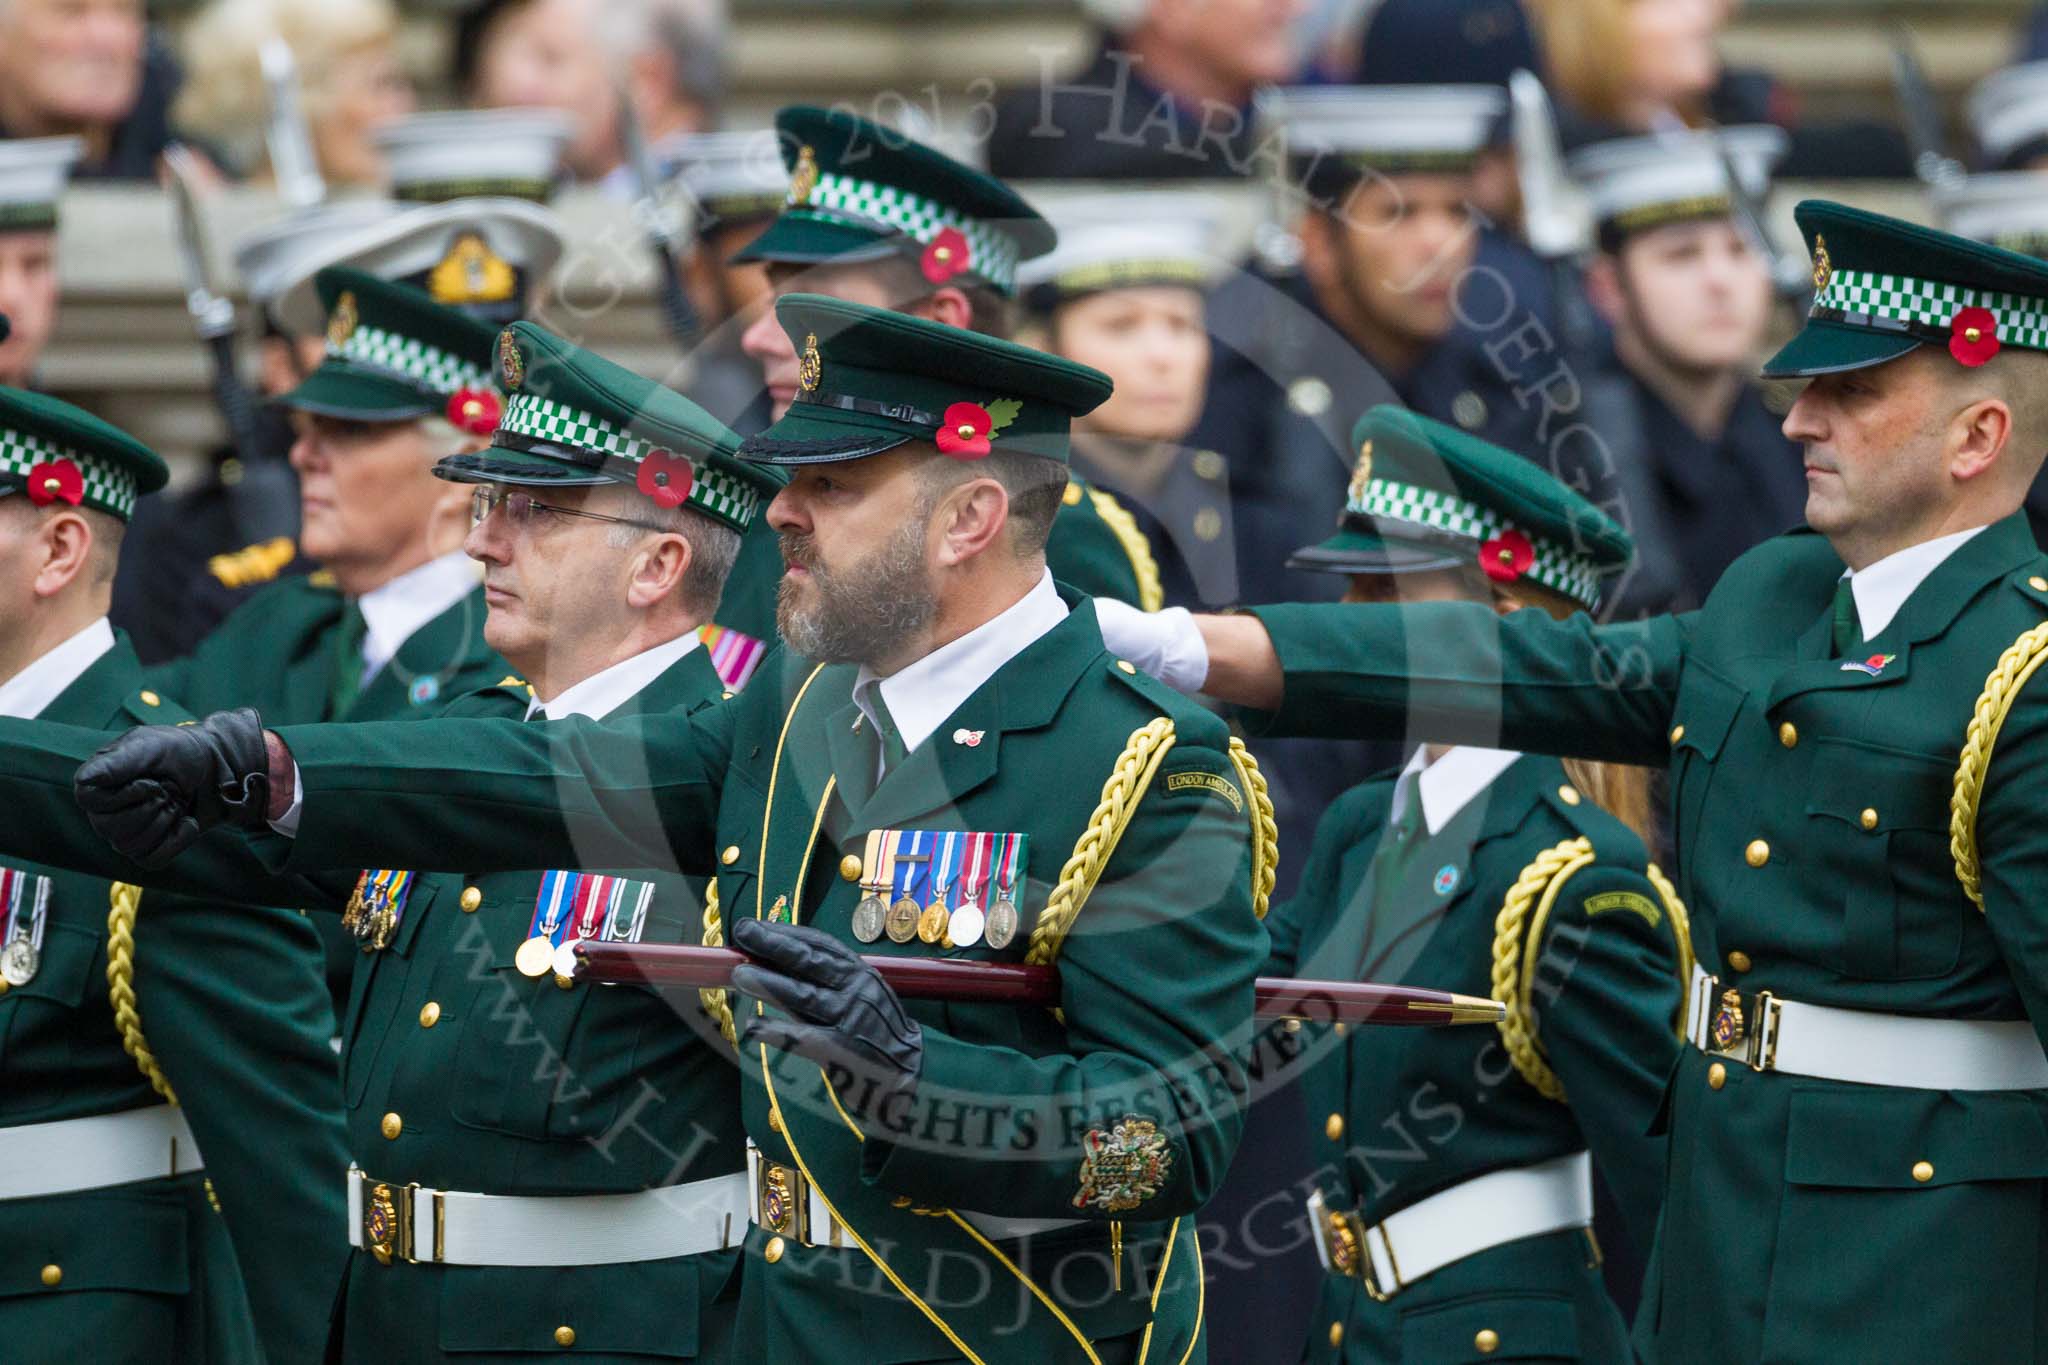 Remembrance Sunday at the Cenotaph 2015: Group M13, London Ambulance Service NHS Trust.
Cenotaph, Whitehall, London SW1,
London,
Greater London,
United Kingdom,
on 08 November 2015 at 12:16, image #1493